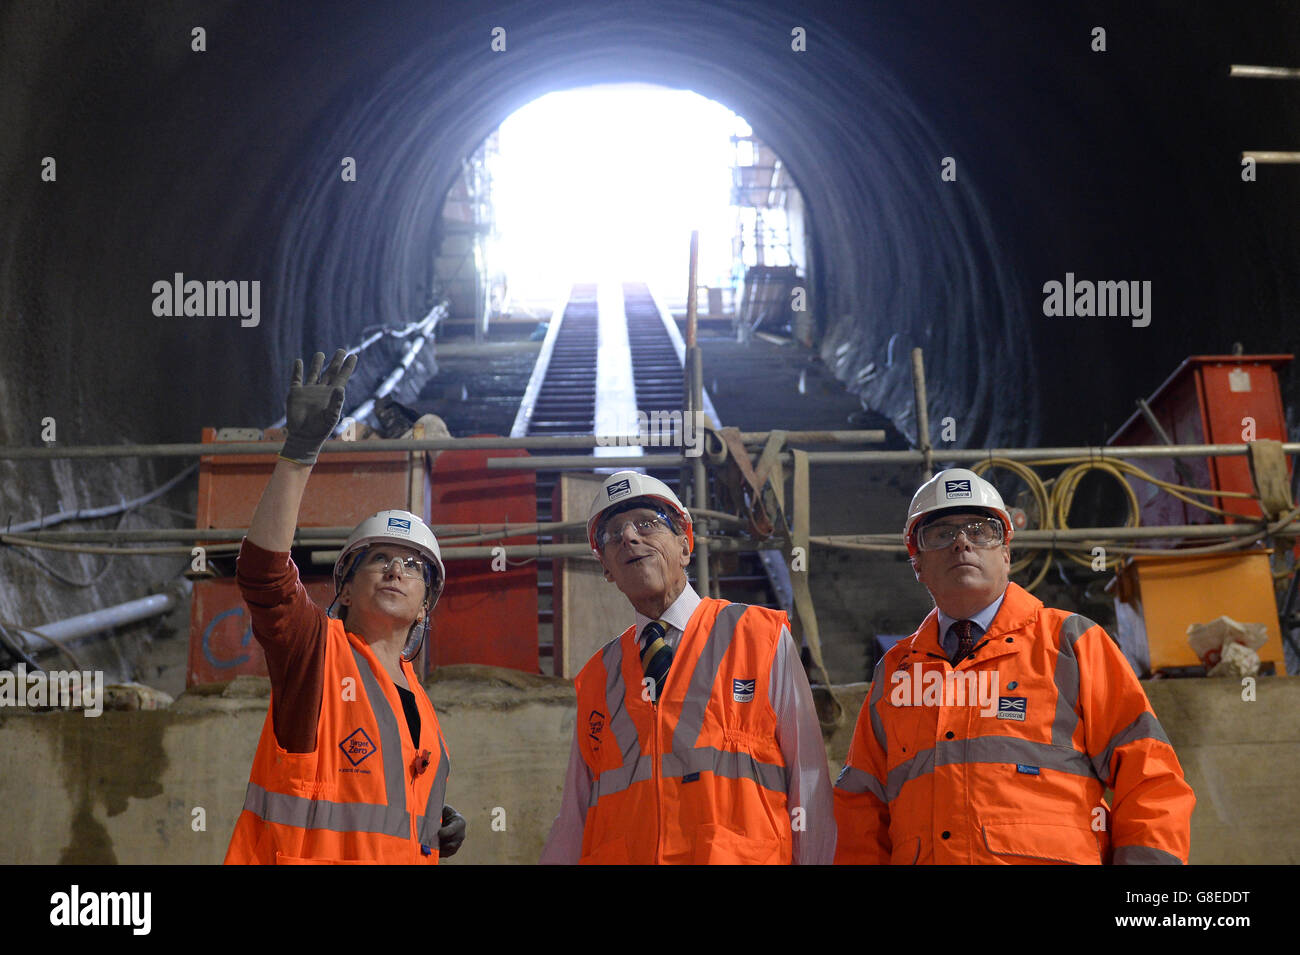 The Duke of Edinburgh is shown an escalator shaft in the new Crossrail station taking shape 30 metres below Farringdon in London by Crossrail Chief Executive Andrew Wolstenholme (right) and Project Manager Linda Miller. Stock Photo